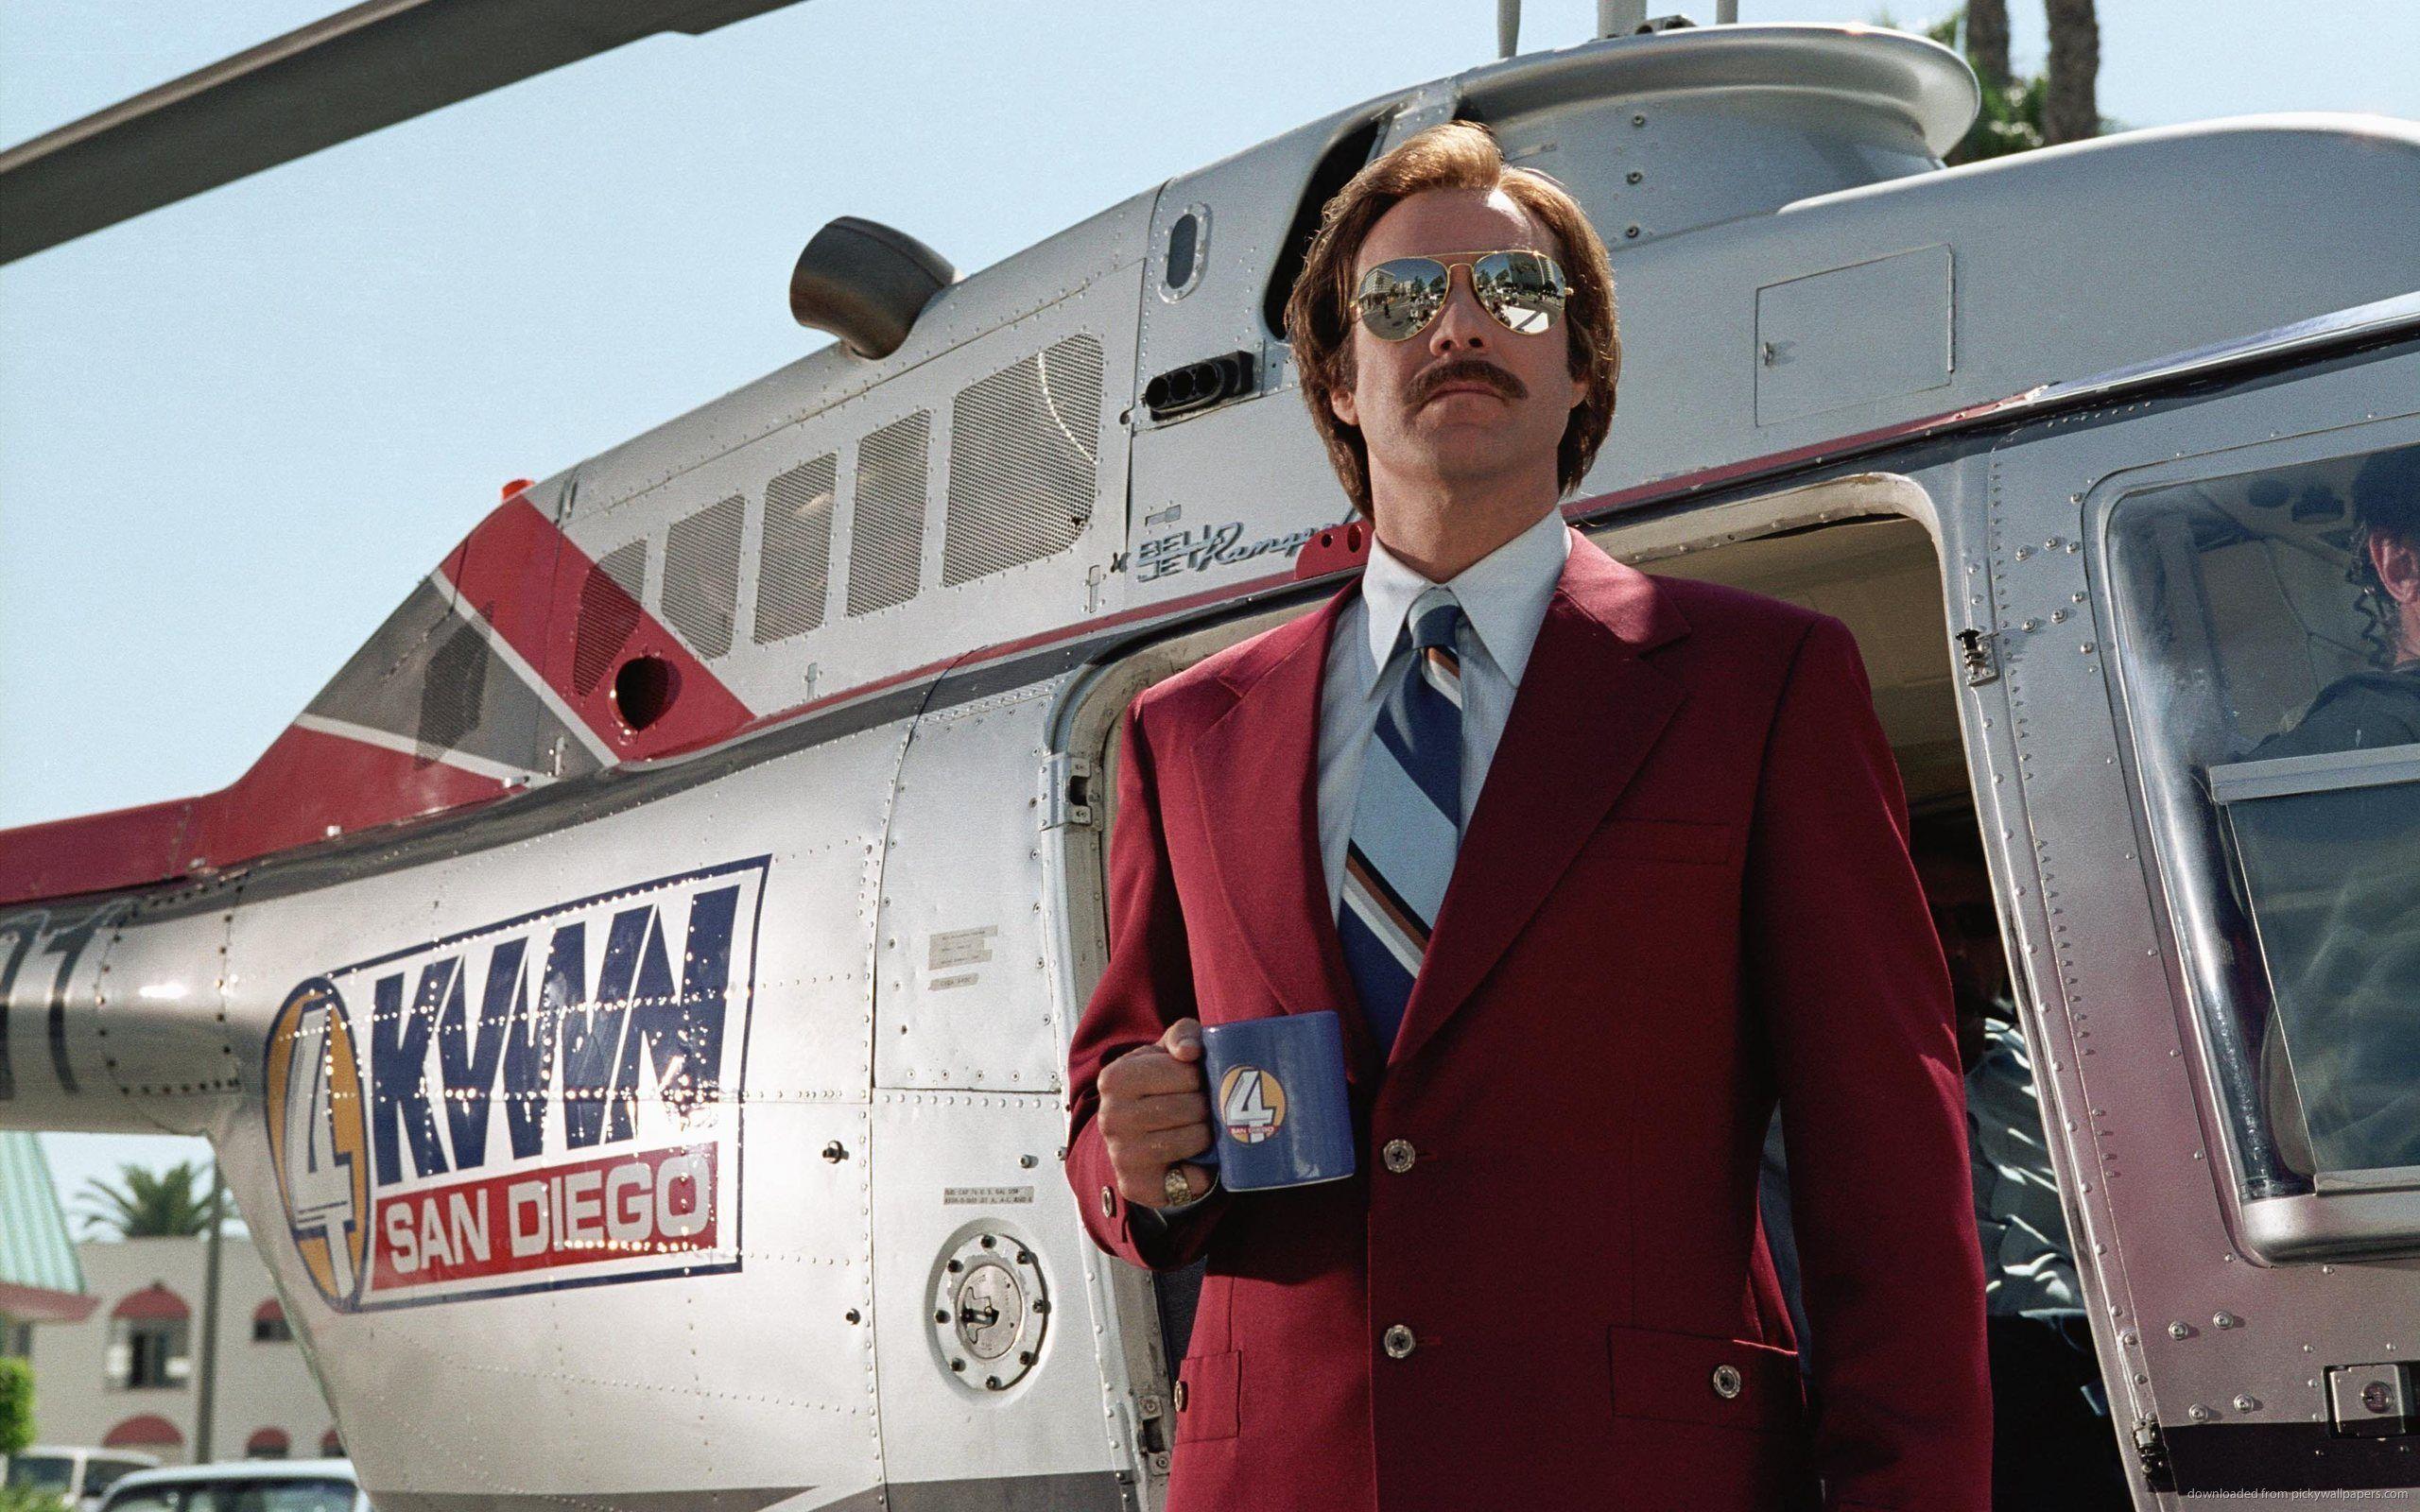 Download 2560x1600 Ron Burgundy Coming Out Of A Helicopter Wallpaper